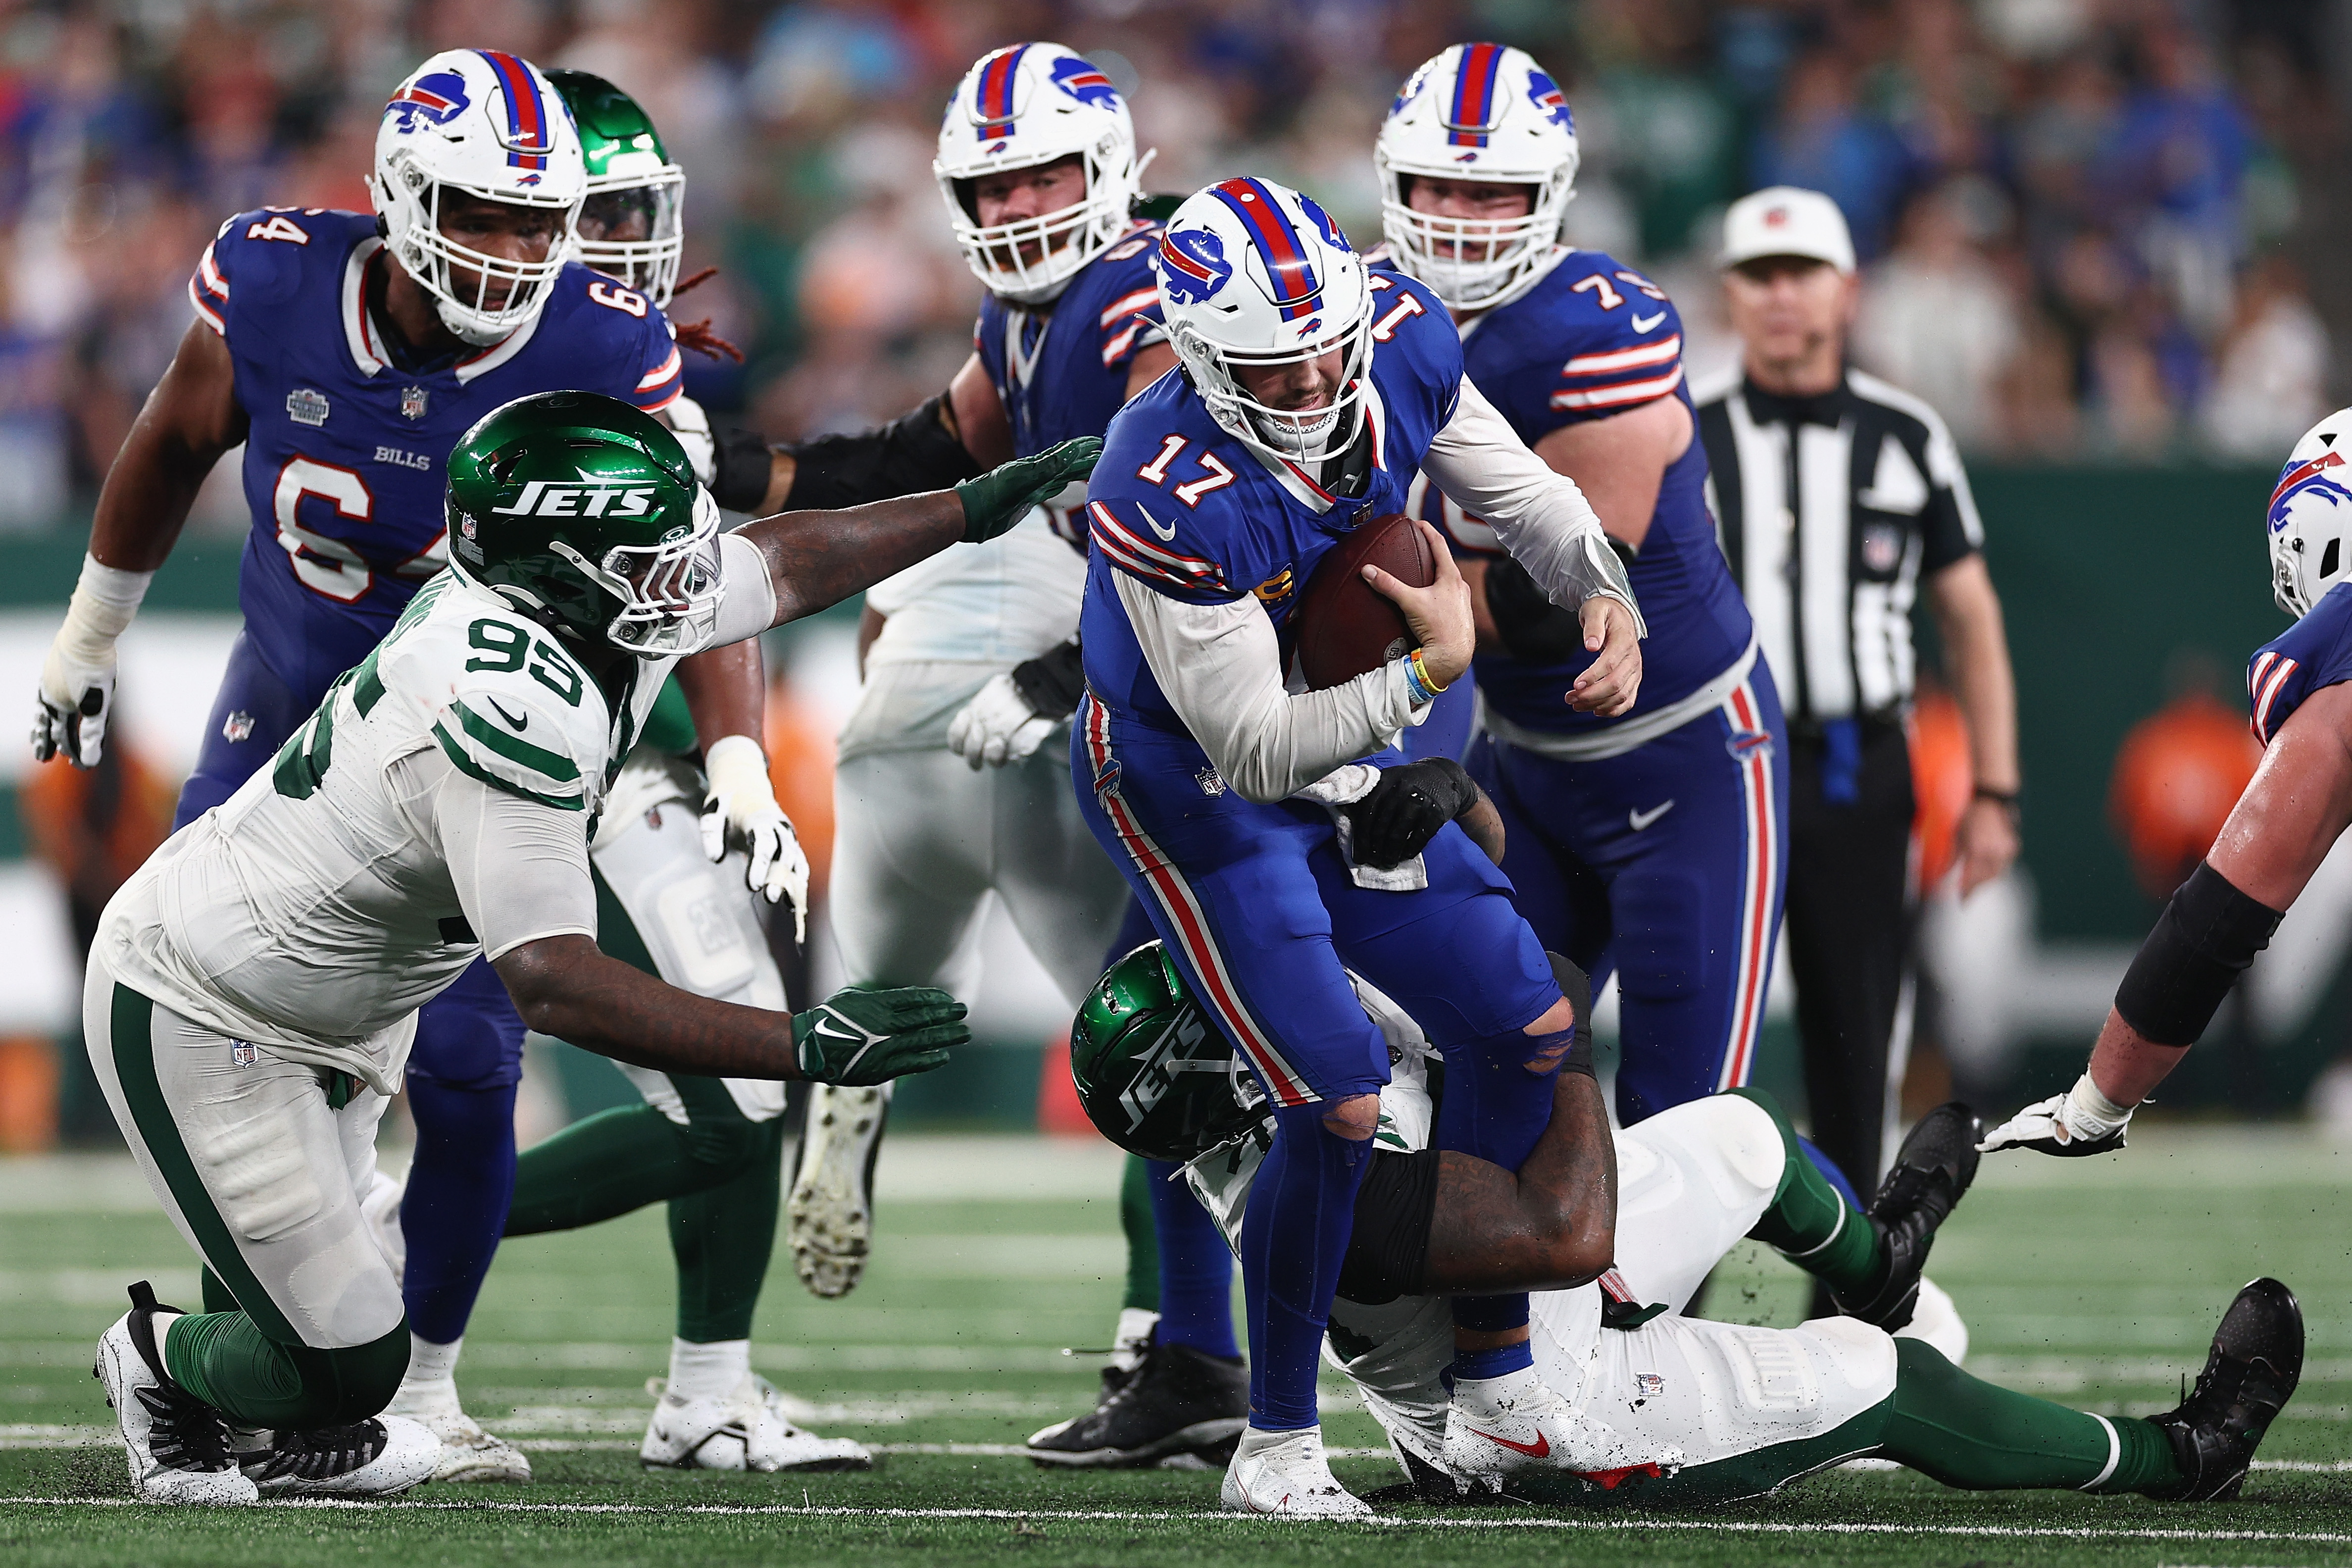 New York Jets vs. Buffalo Bills Game Preview - Aaron Rodgers vs